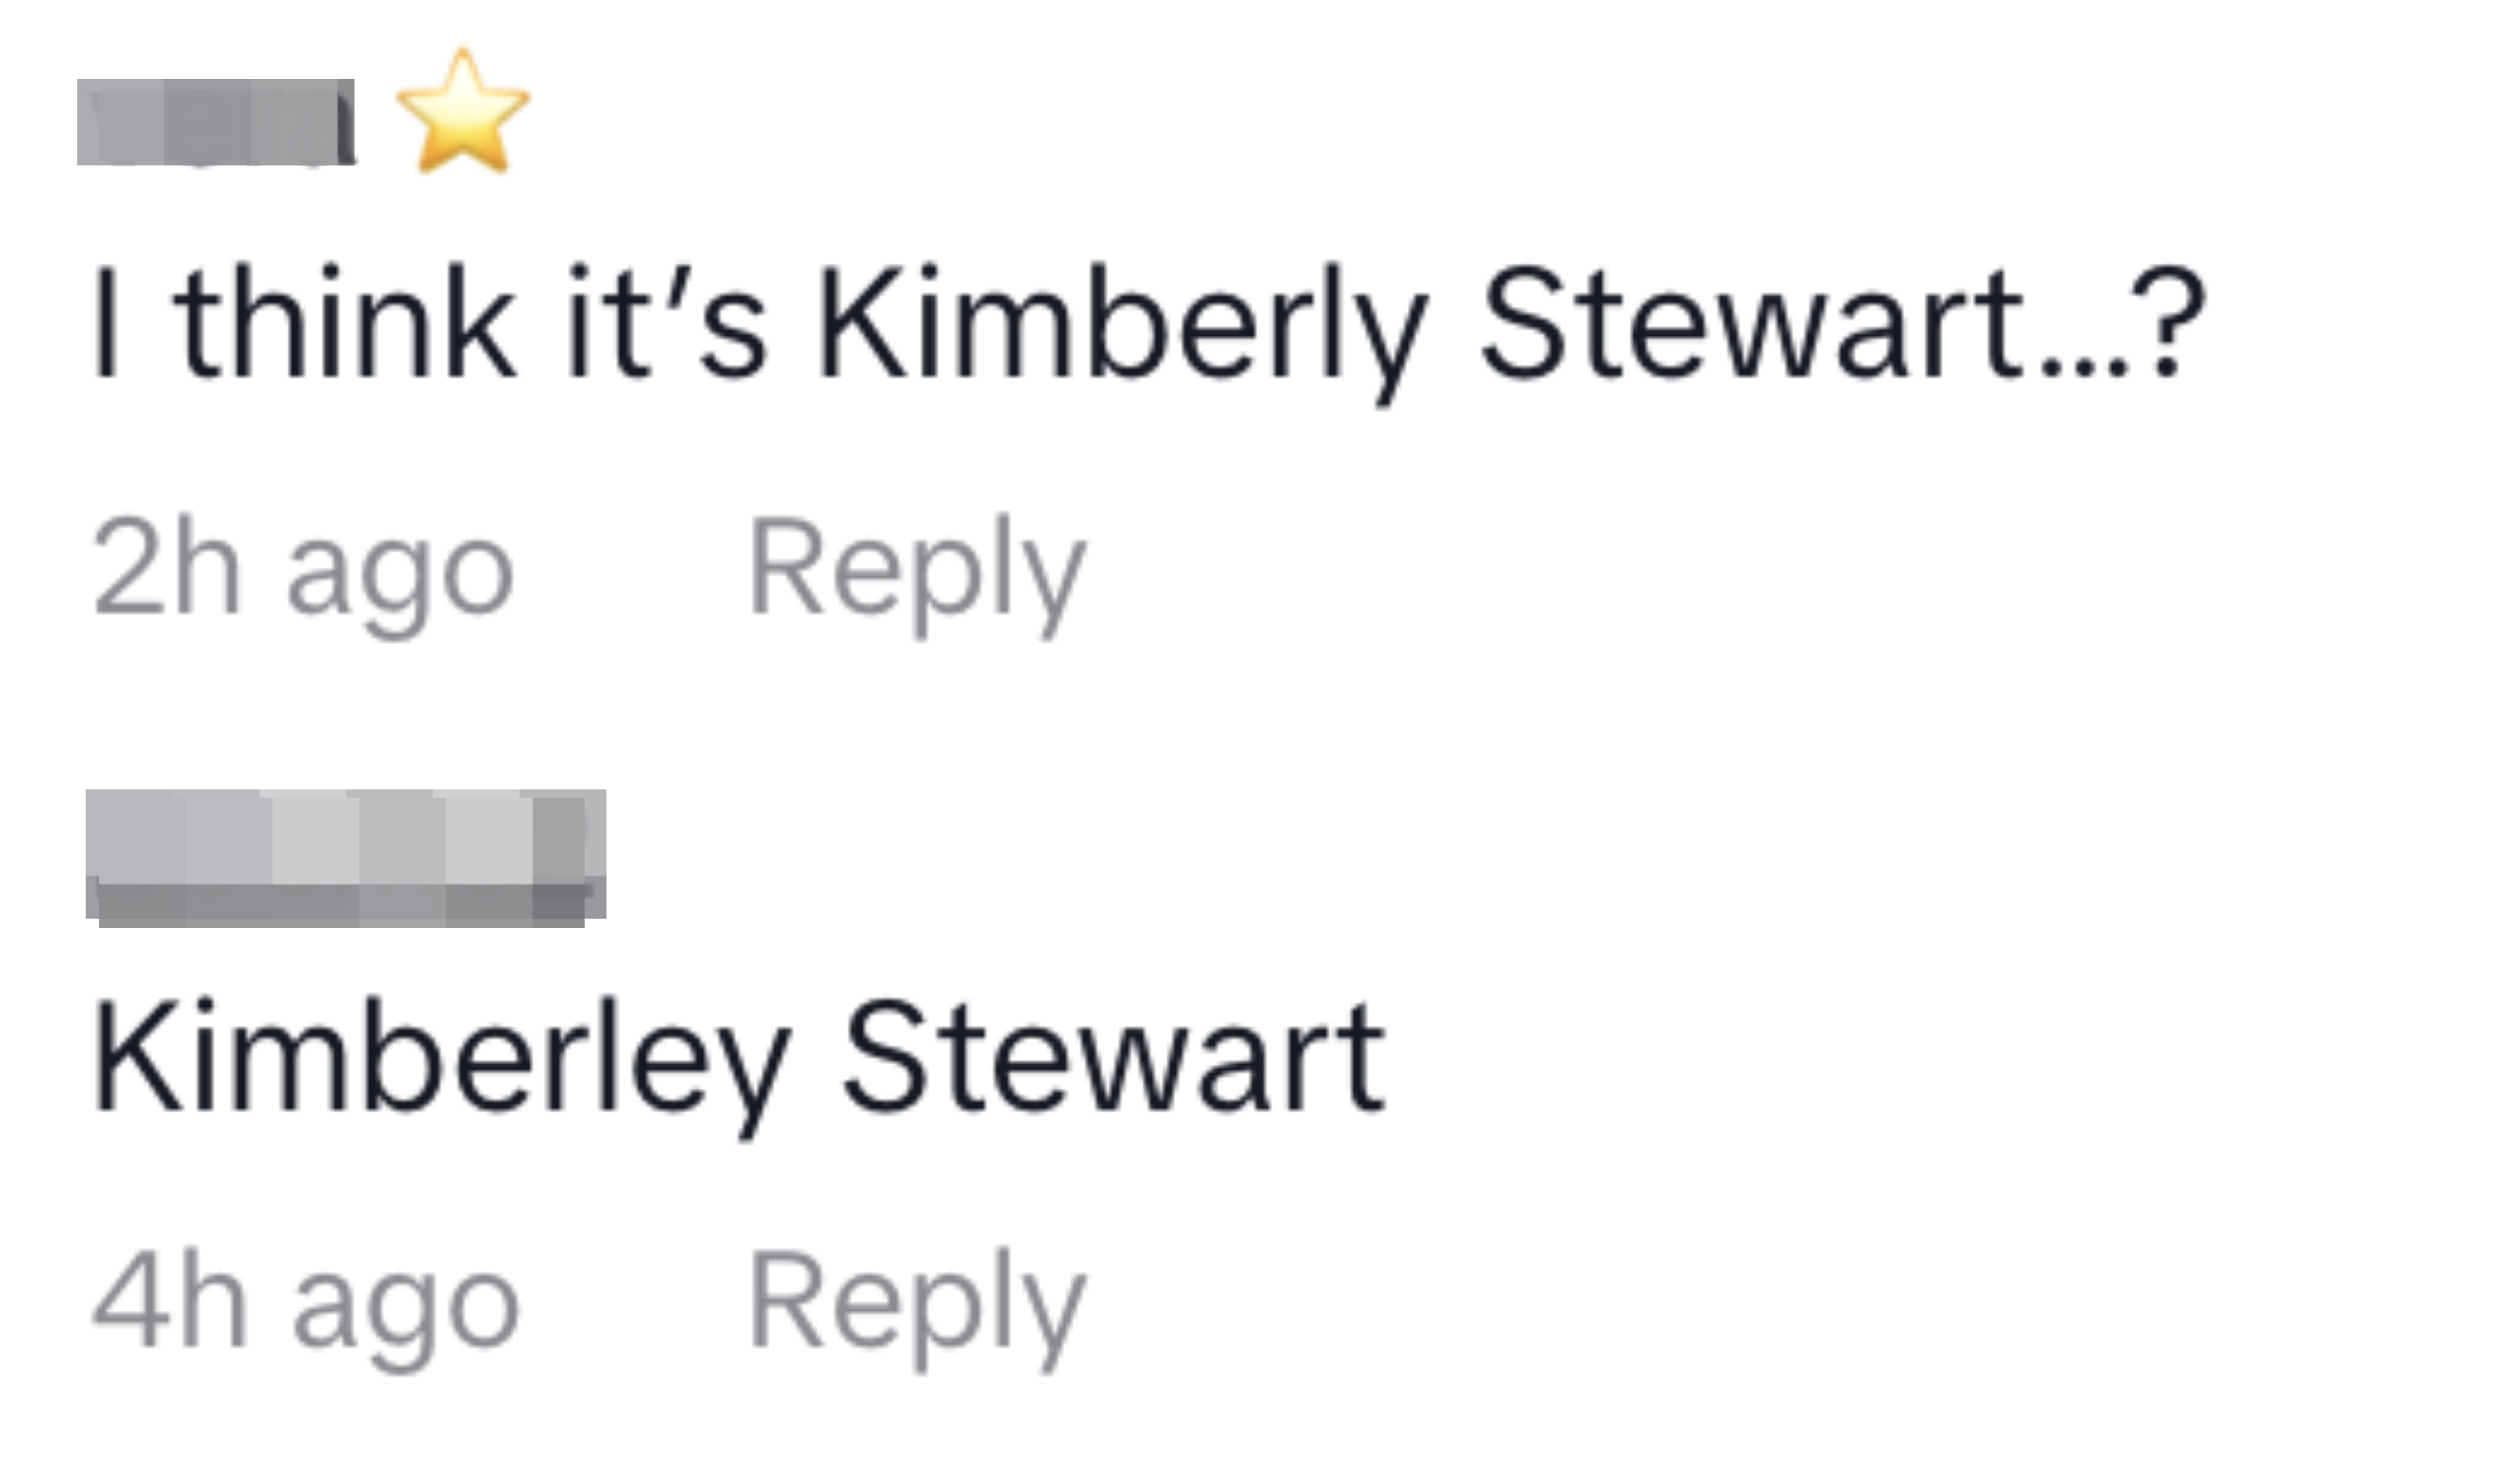 Screenshot of comments mentioning Kimberly